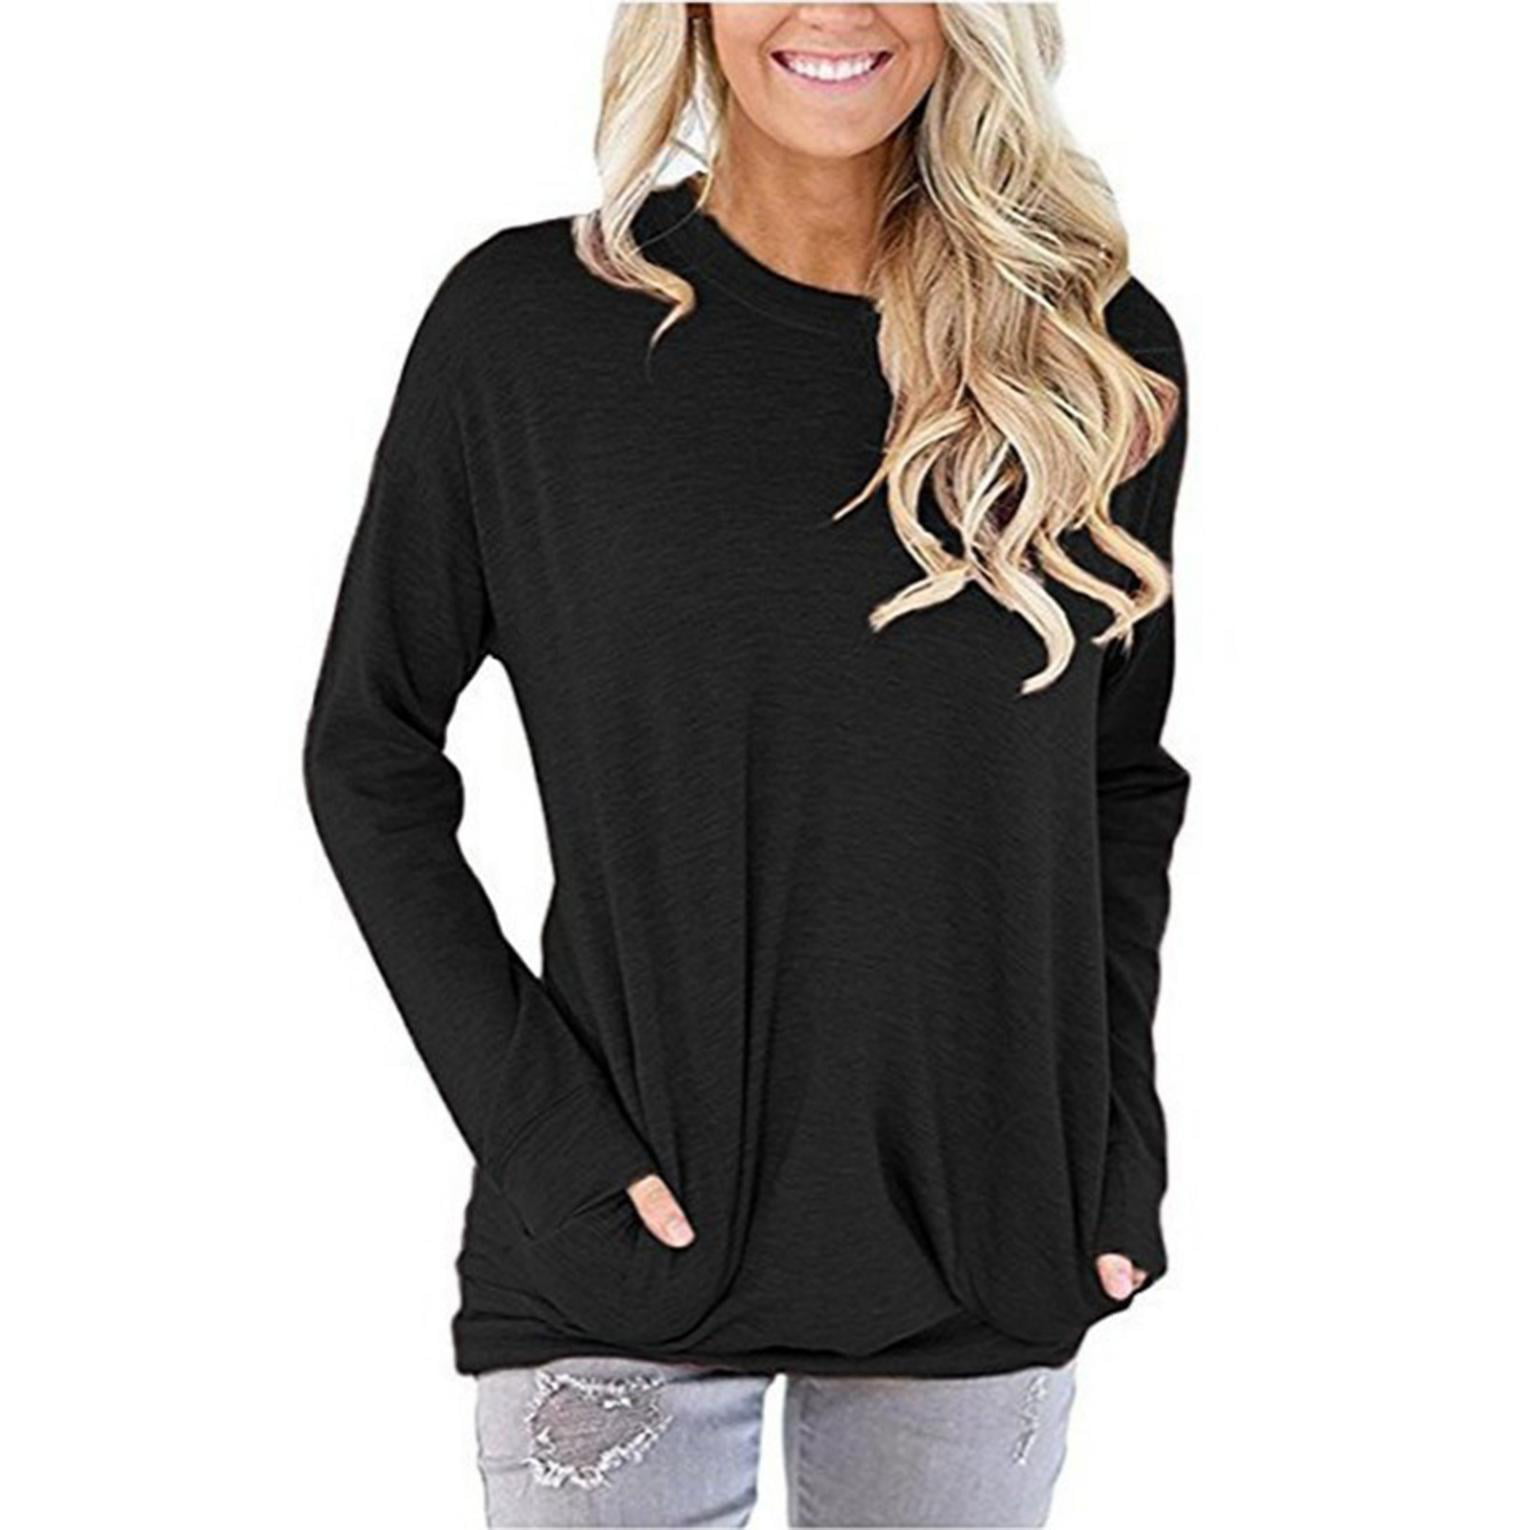 Danhjin Women Men Compression Shirt Casual Round Neck Printed Blouse Tops